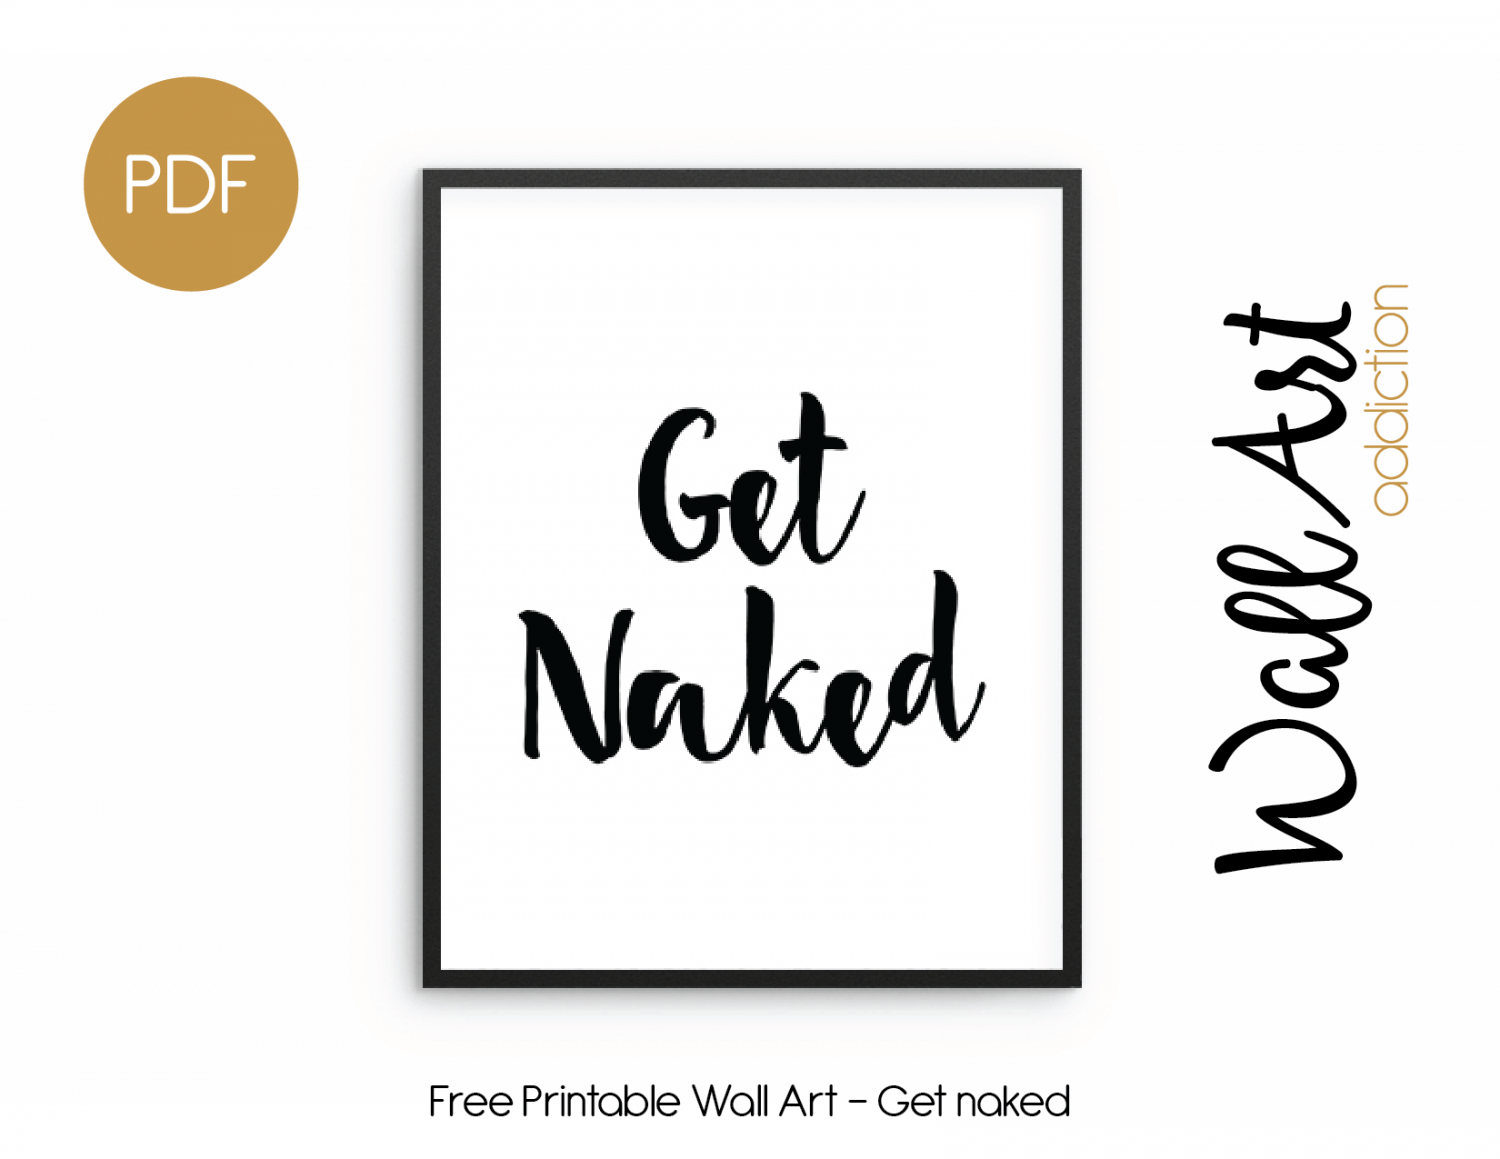 Free Printable Wall Art - Get Naked | For The Home In 2019 - Free Printable Wall Art For Bathroom